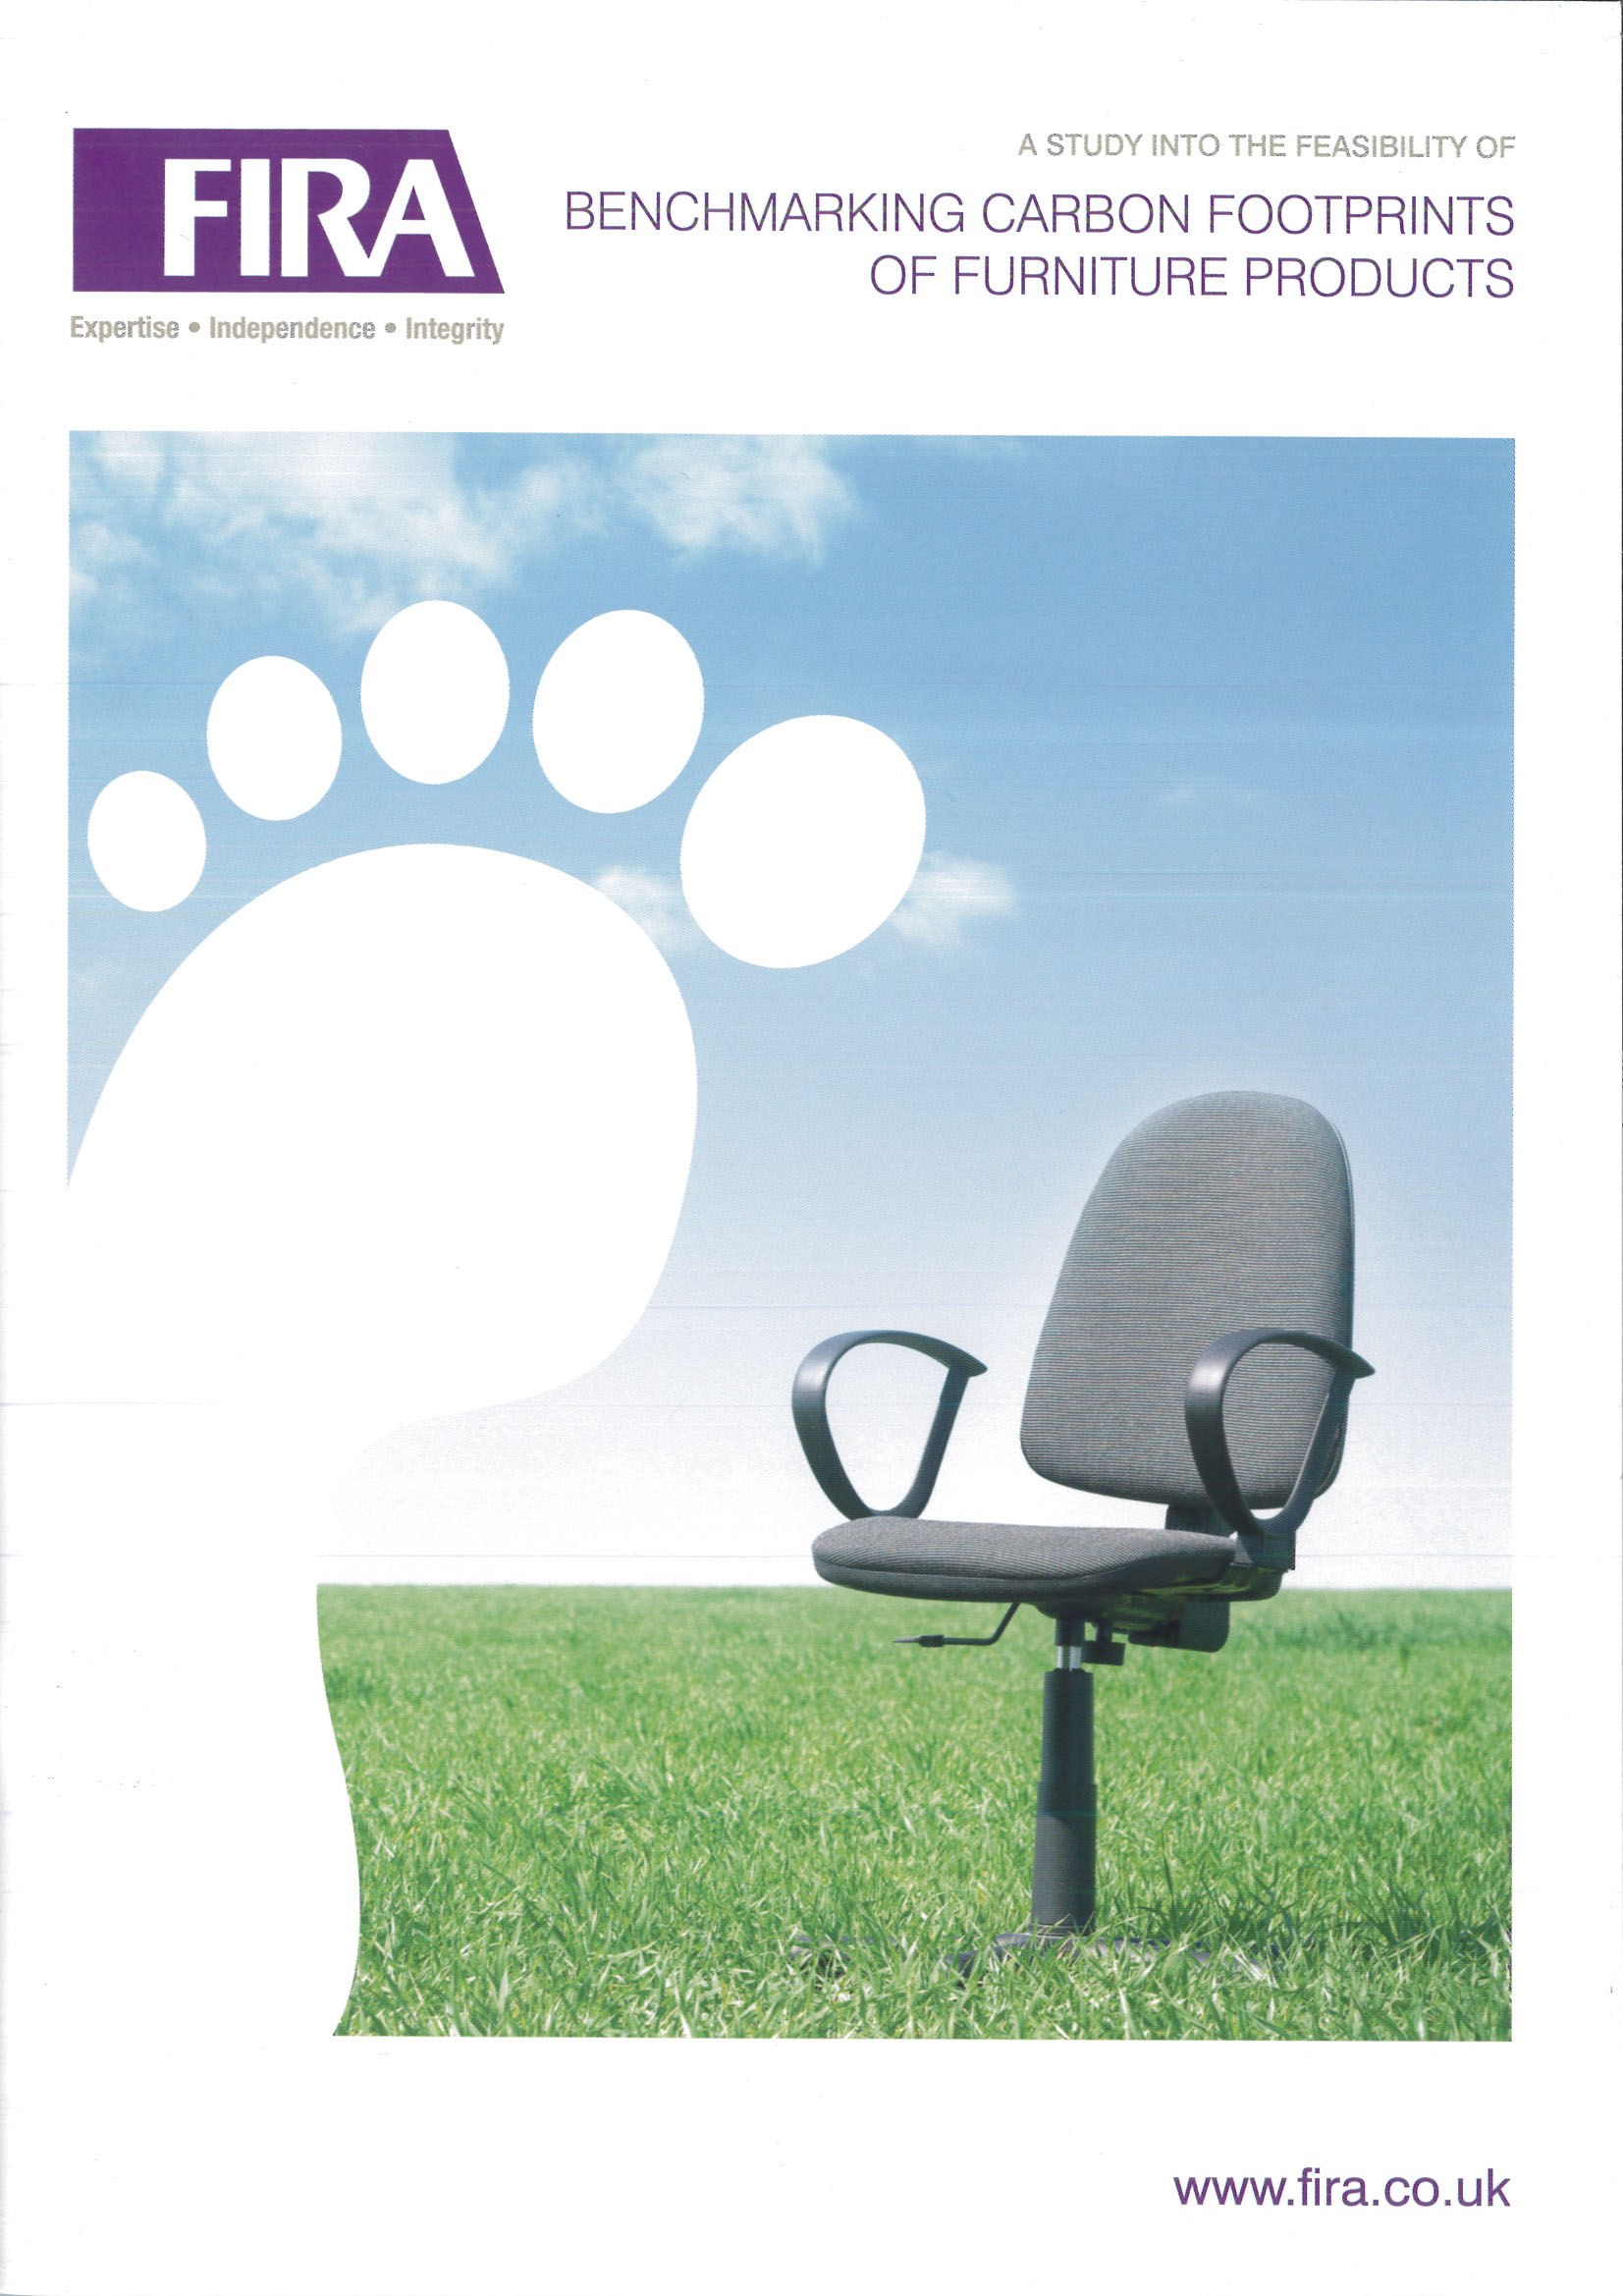 Benchmarking Carbon Footprints of Furniture Products - Feasability Study 2011